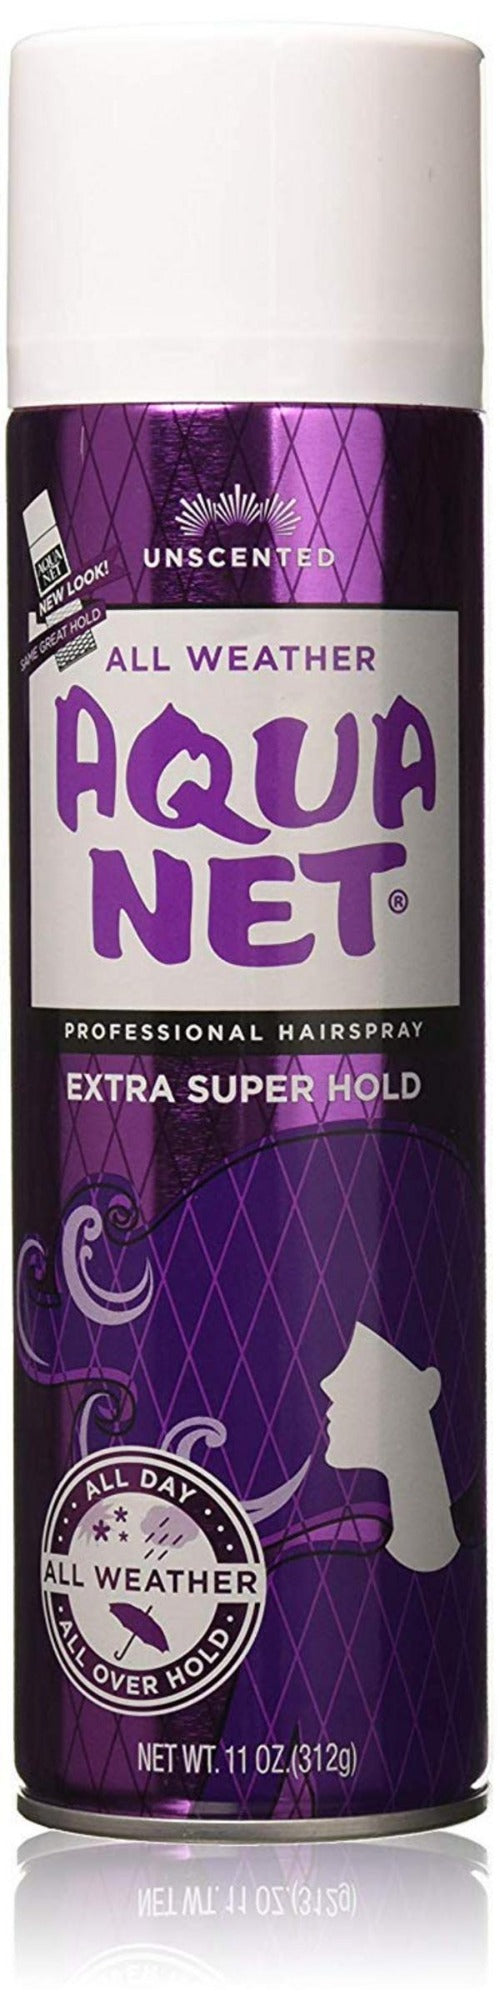 Aqua Net Extra Super Hold Professional Hair Spray, Unscented, 11 oz (Pack of 2)